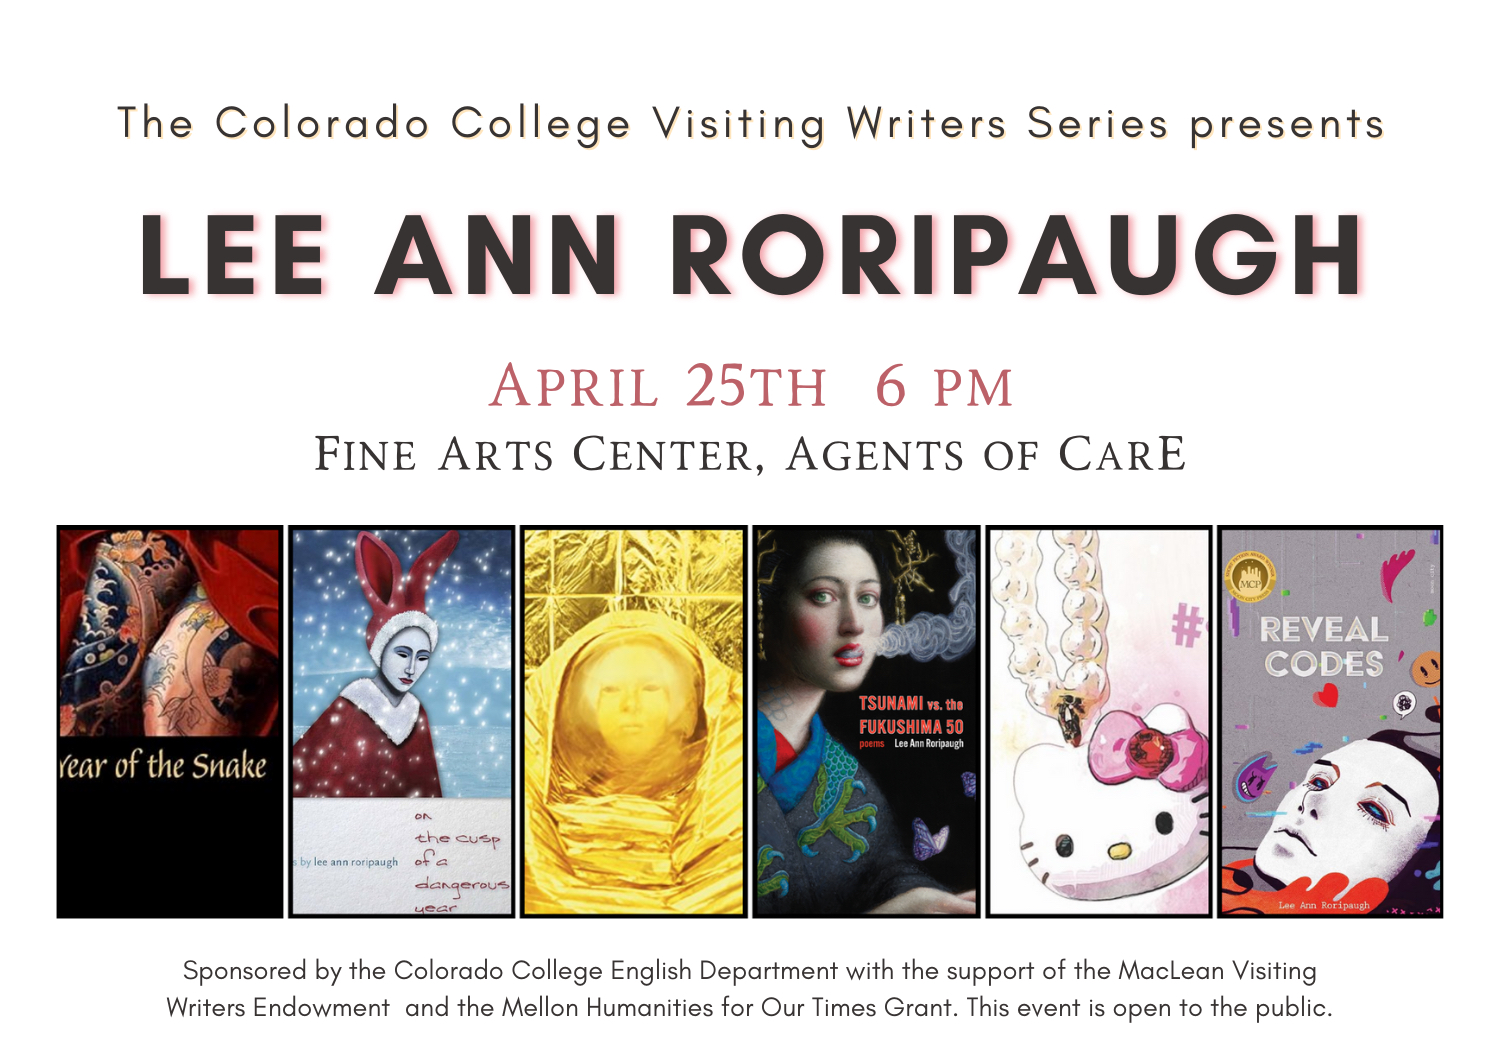 Invitation to join VWS event with Lee Ann Roripaugh